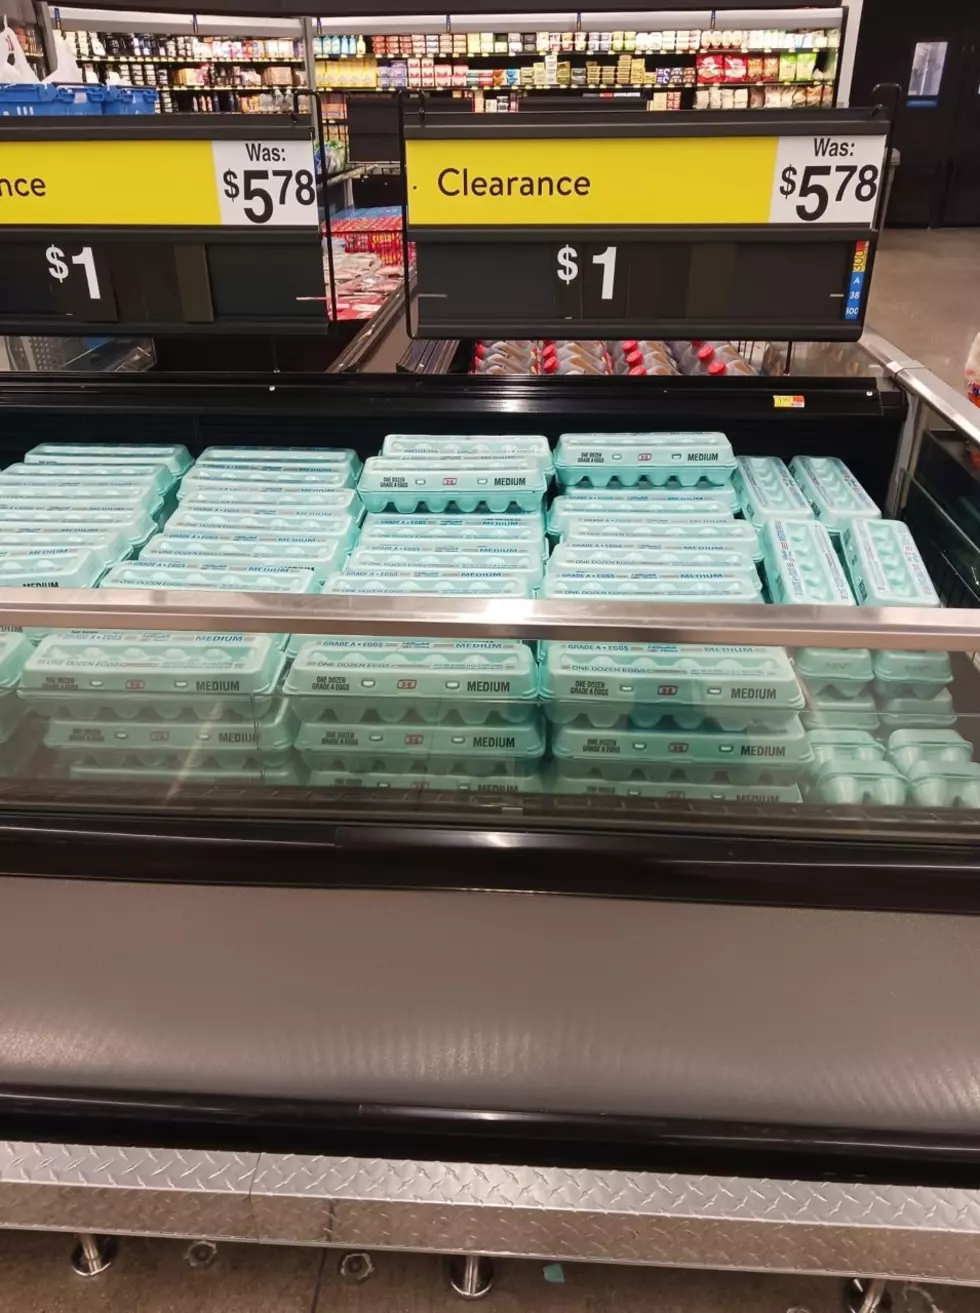 Casper Walmart Sold Cartons of Eggs for One Dollar…But Now They’re Mostly Gone